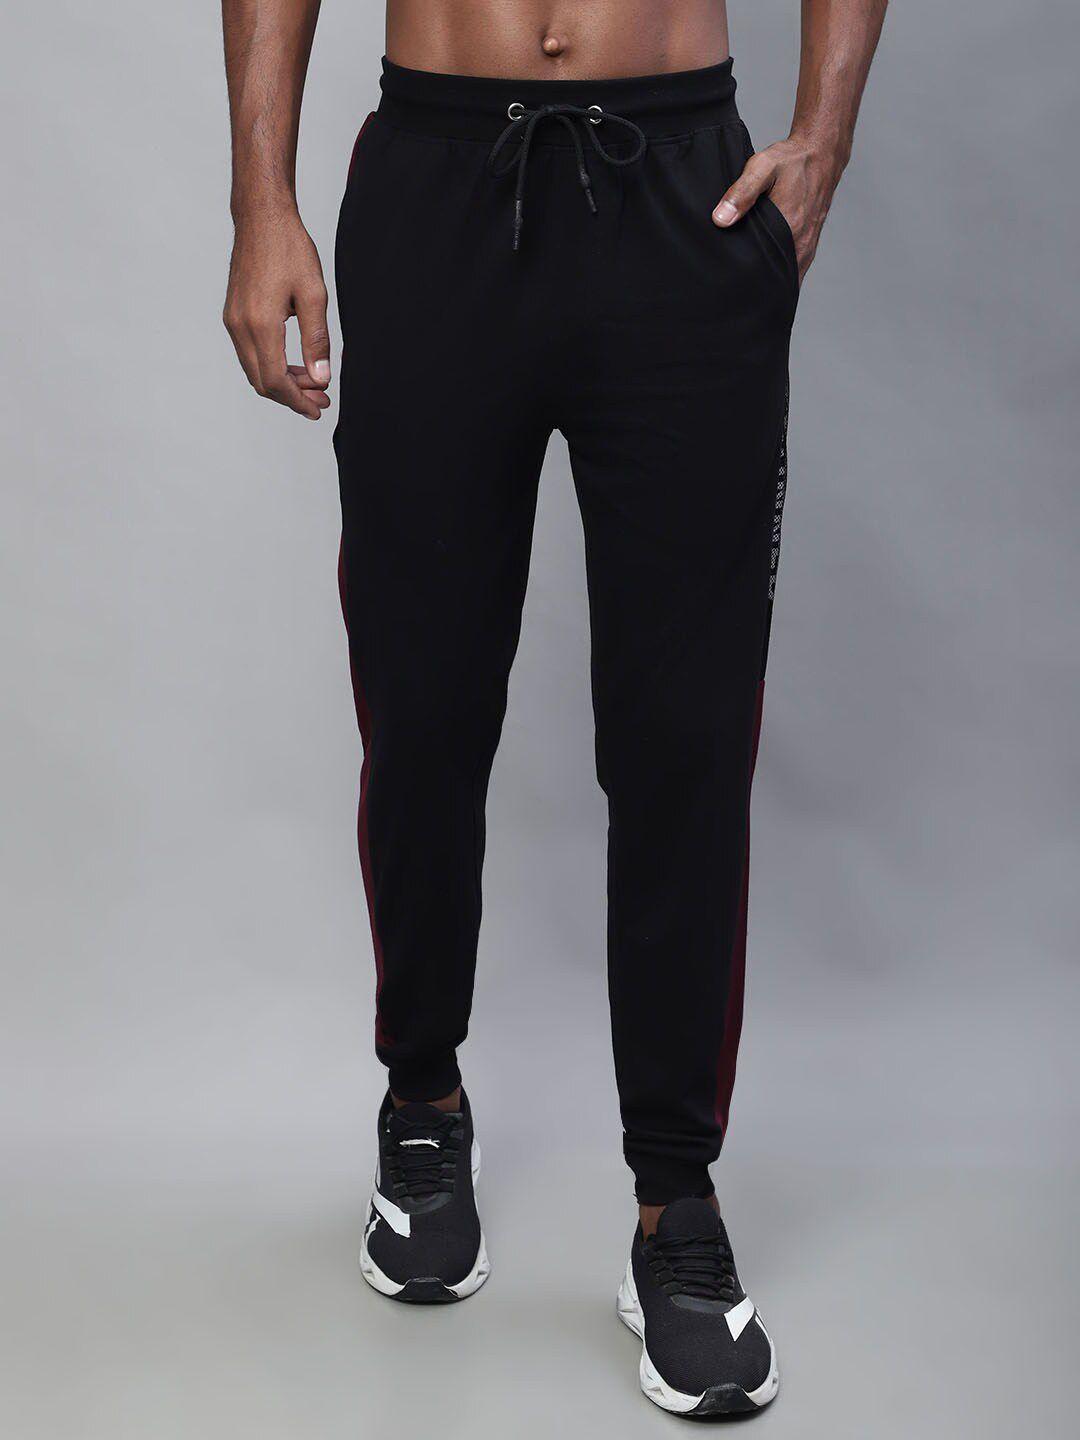 cantabil-men-relaxed-fit-cotton-training-or-gym-sports-joggers